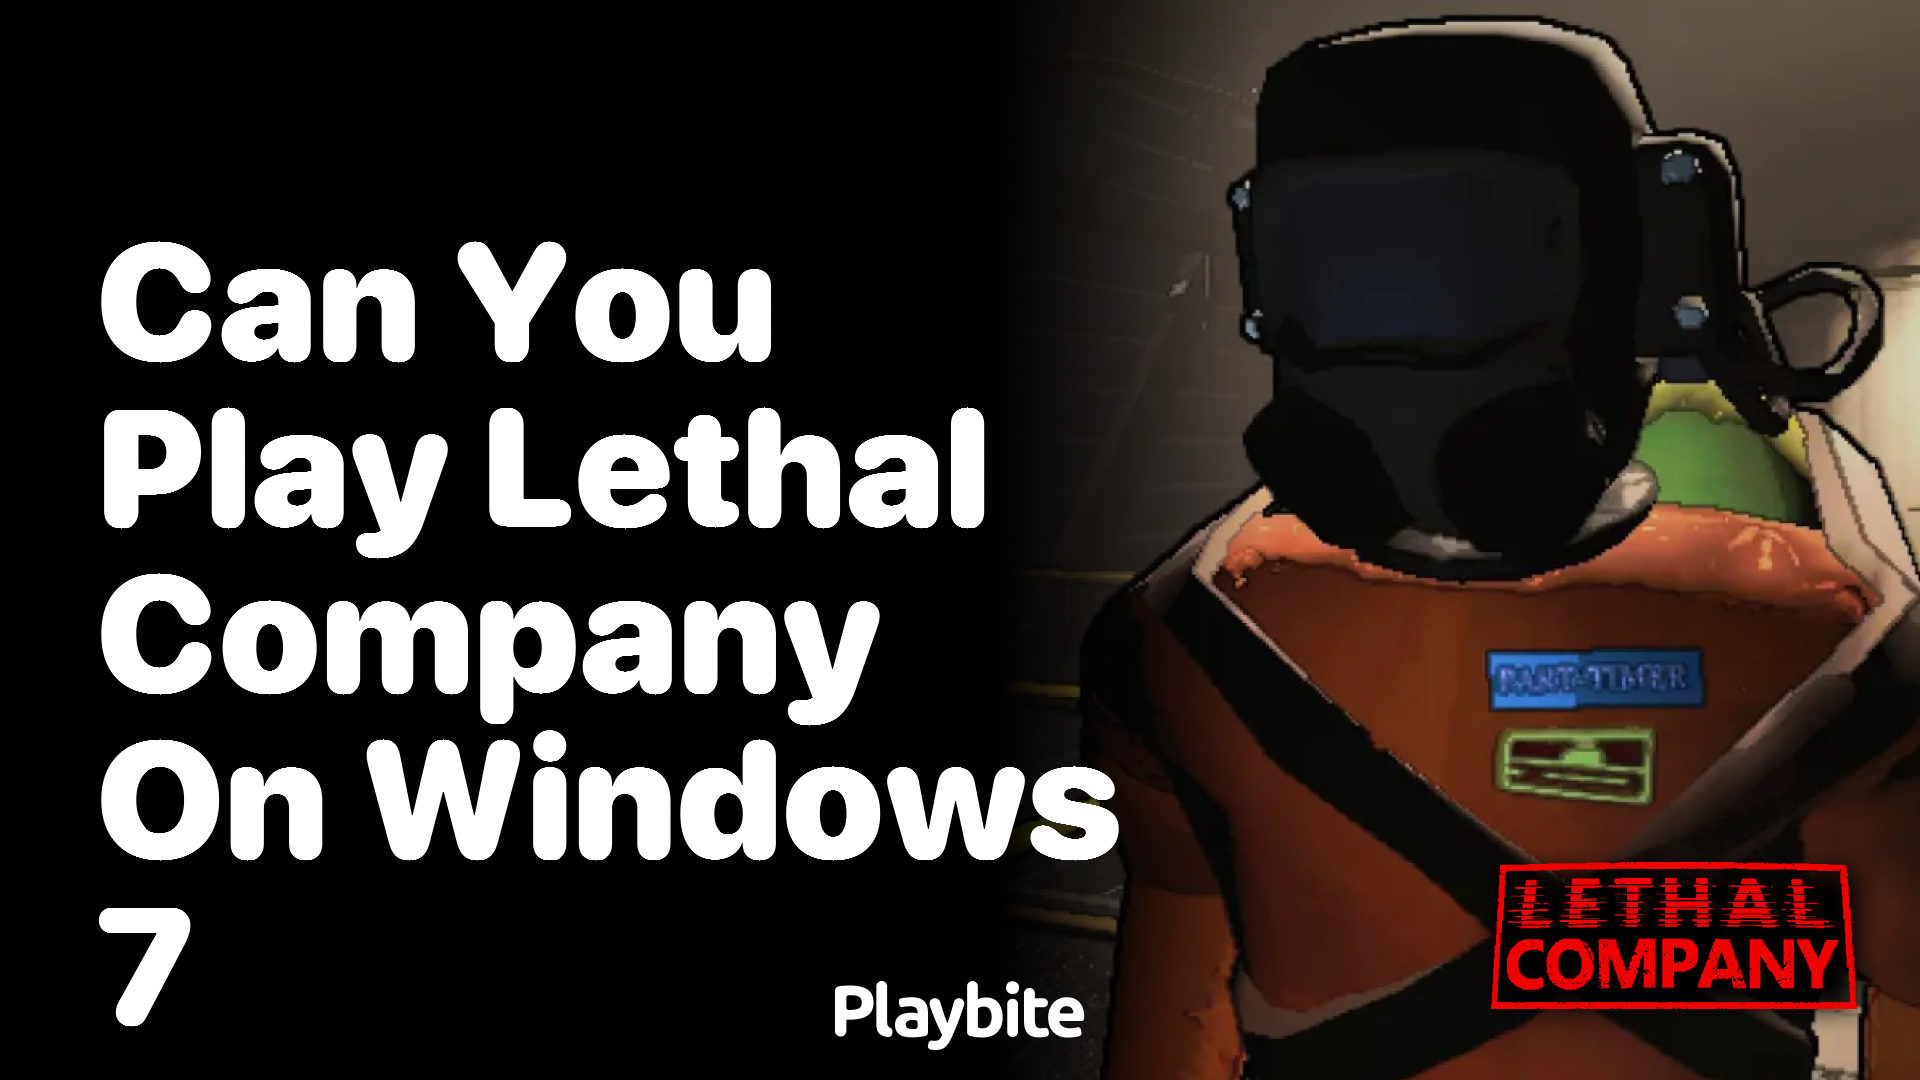 Can You Play Lethal Company on Windows 7?